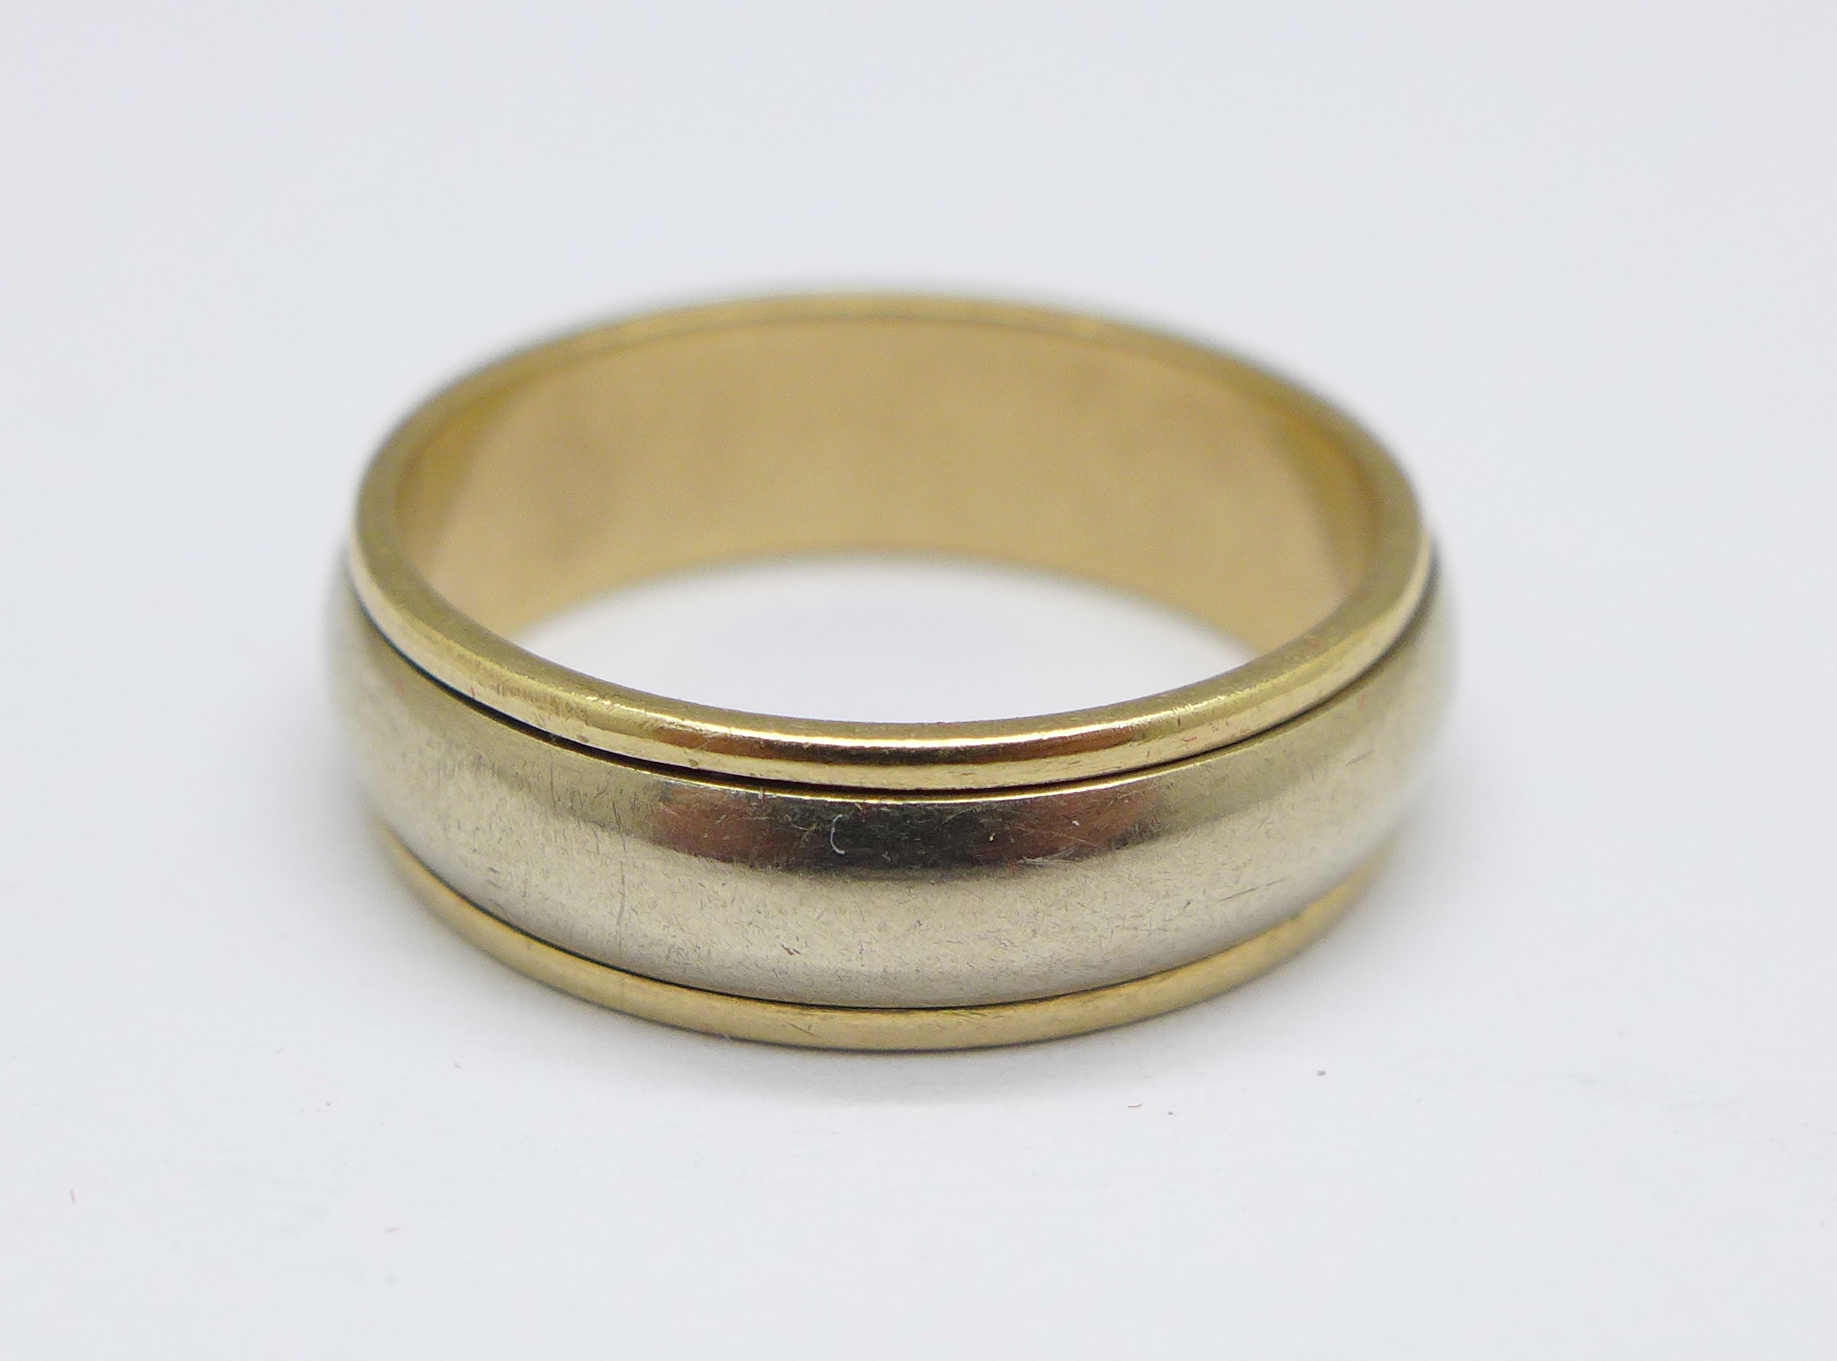 A 9ct gold ring, year 2000, 4.5g, M - Image 3 of 3